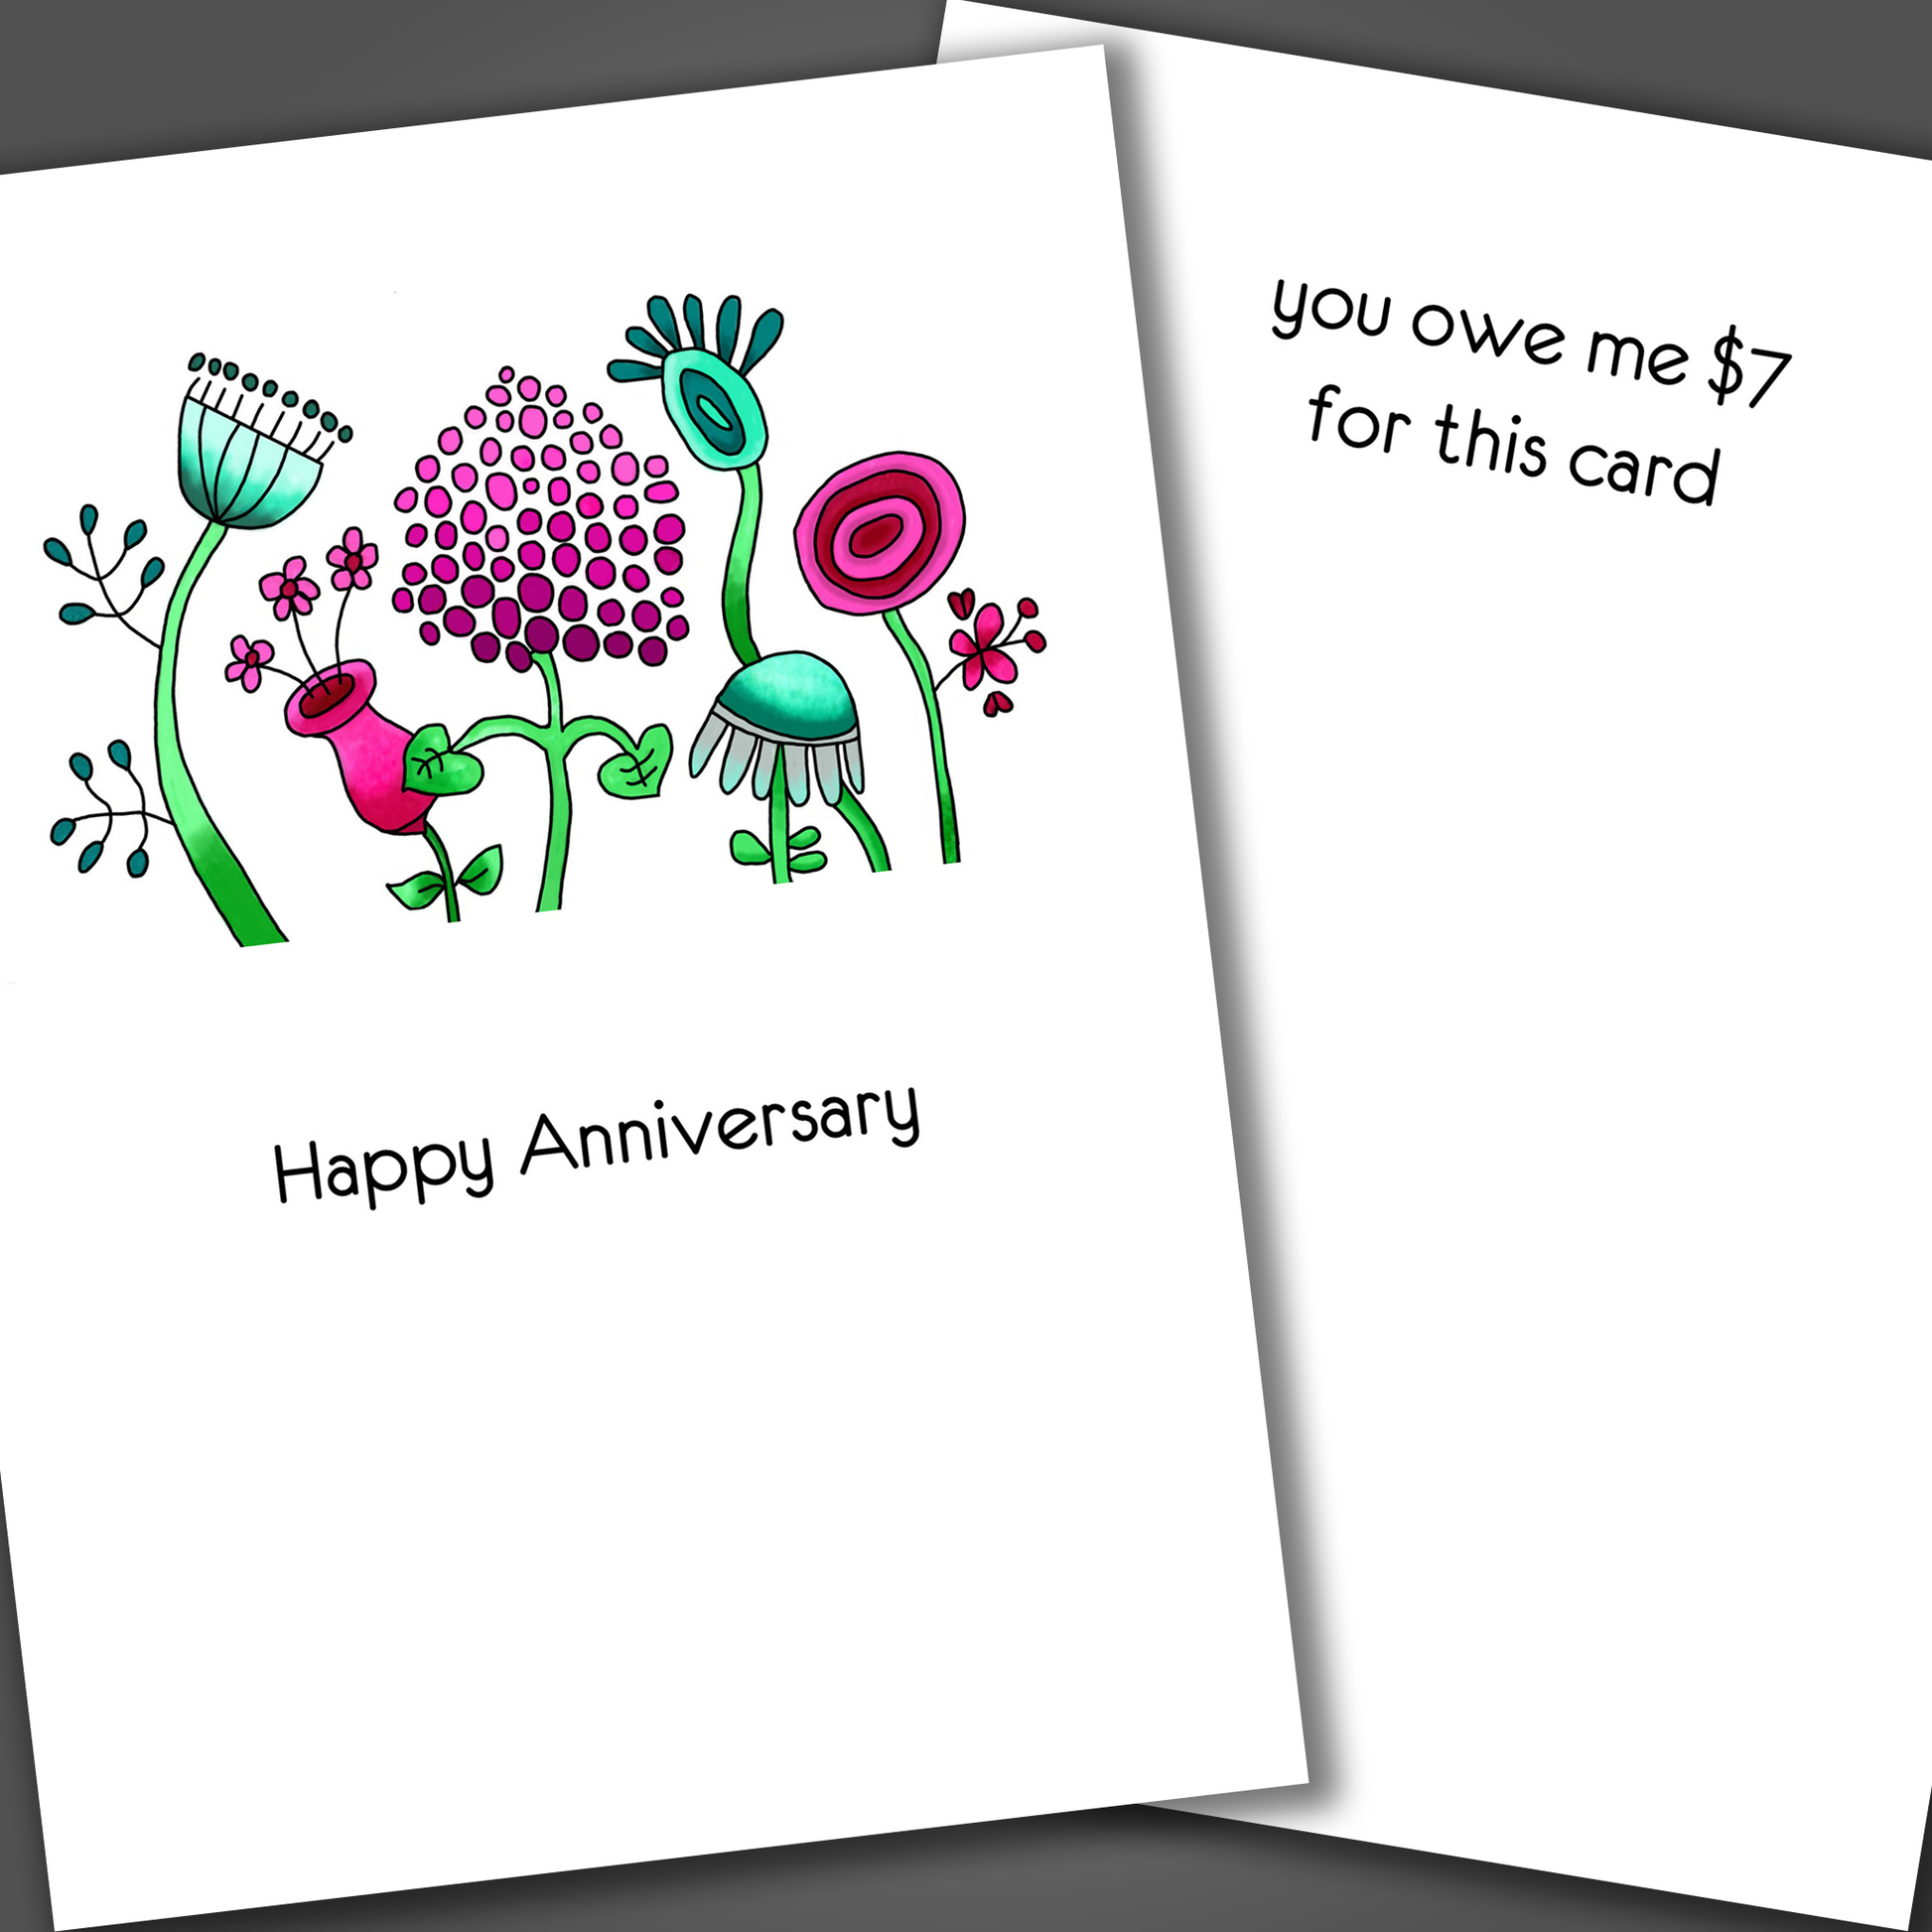 Funny anniversary card with pink and green flowers on the front of the card. Inside is a funny joke that says your owe me 7 dollars for this card!